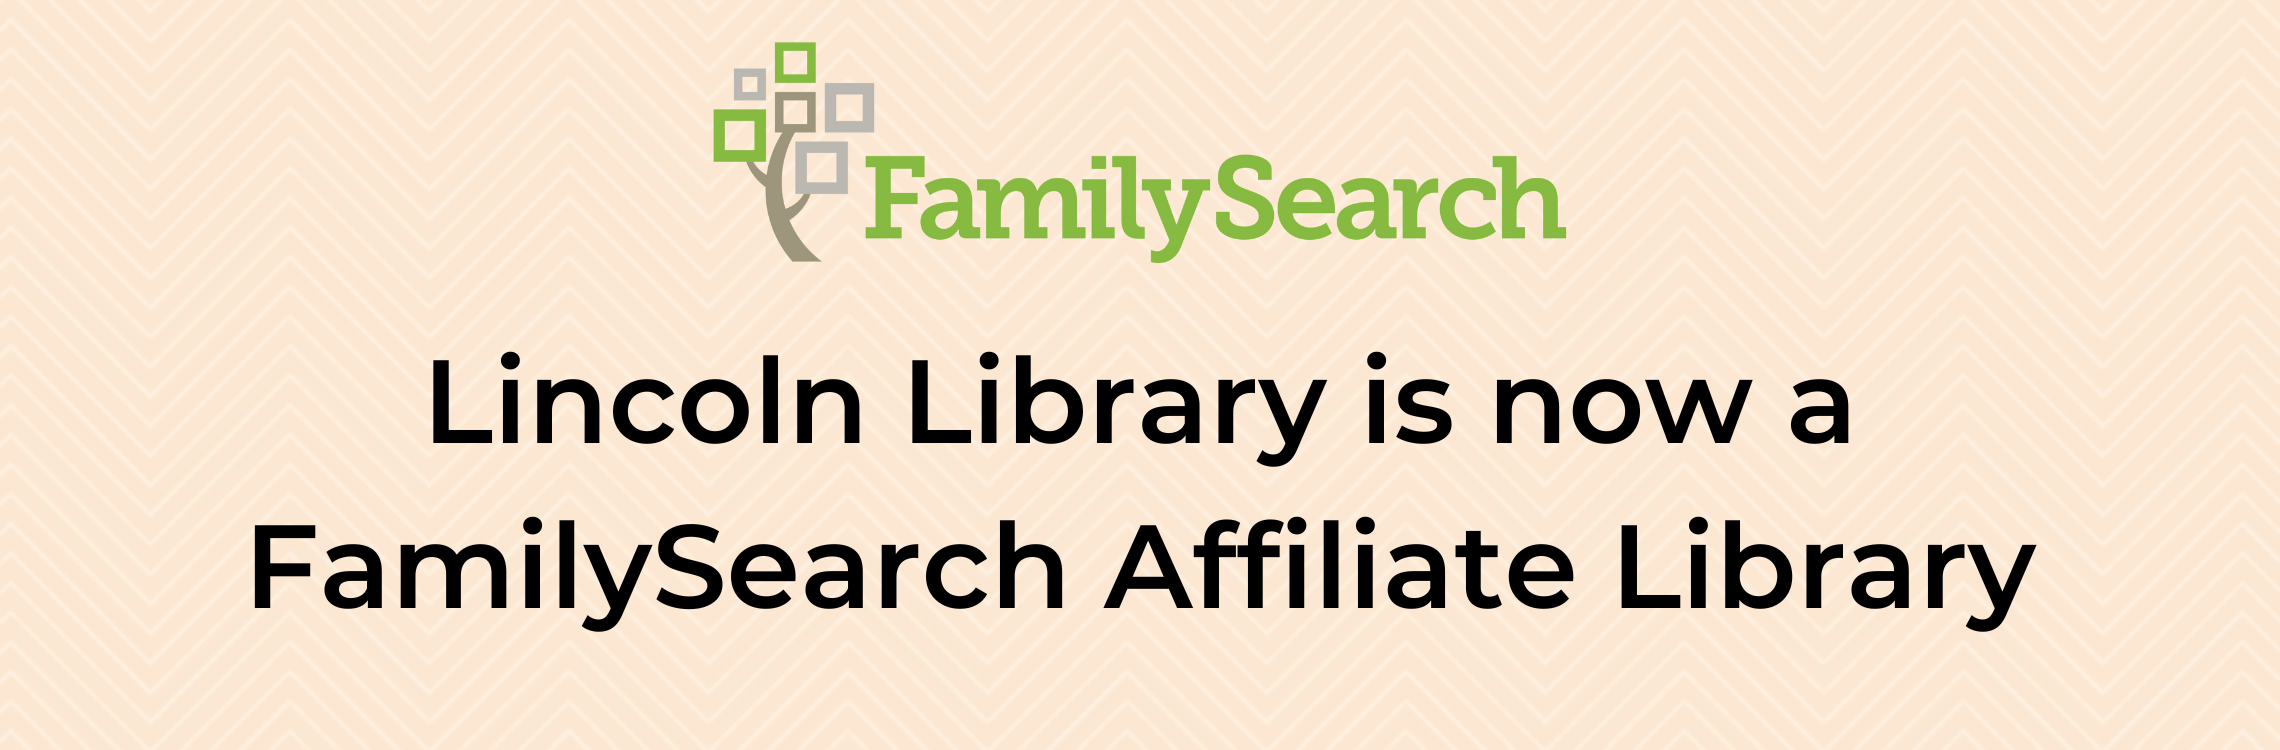 Lincoln Library is now a FamilySearch affiliate library